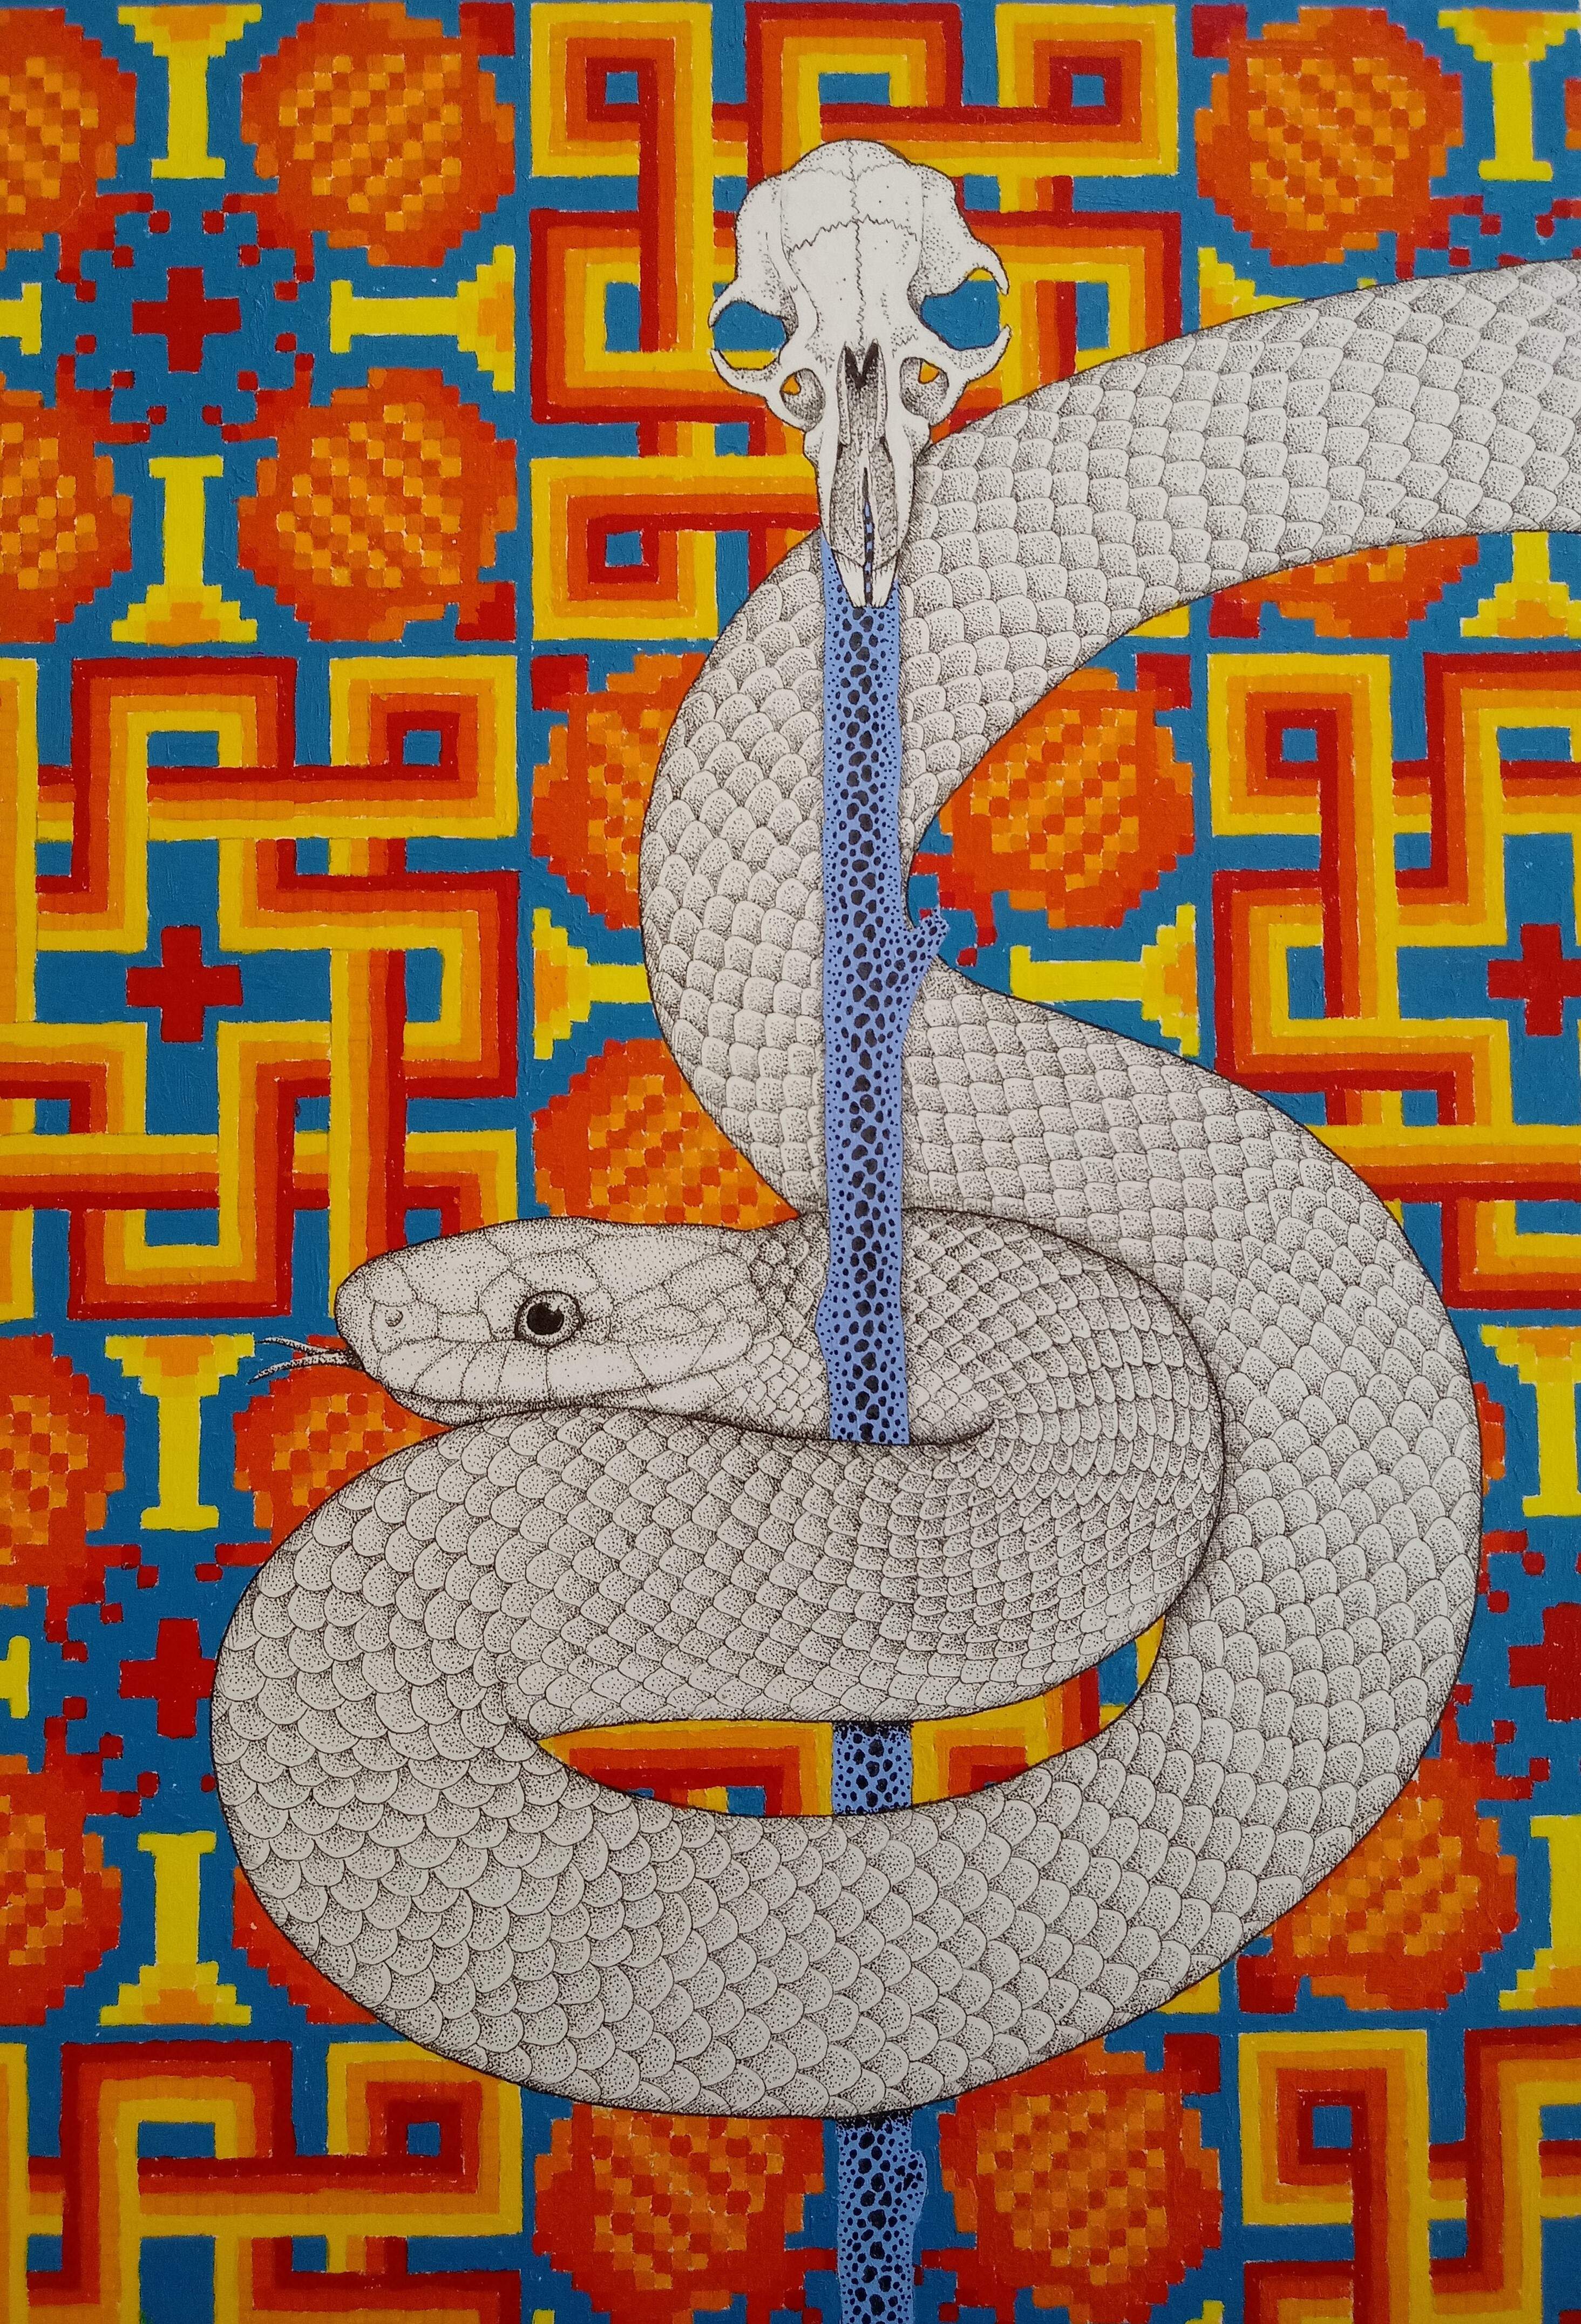 2021, Acrylic and ink on Hahnemühle paper, for "Fantastic Austrian Reptiles", 20x30cm